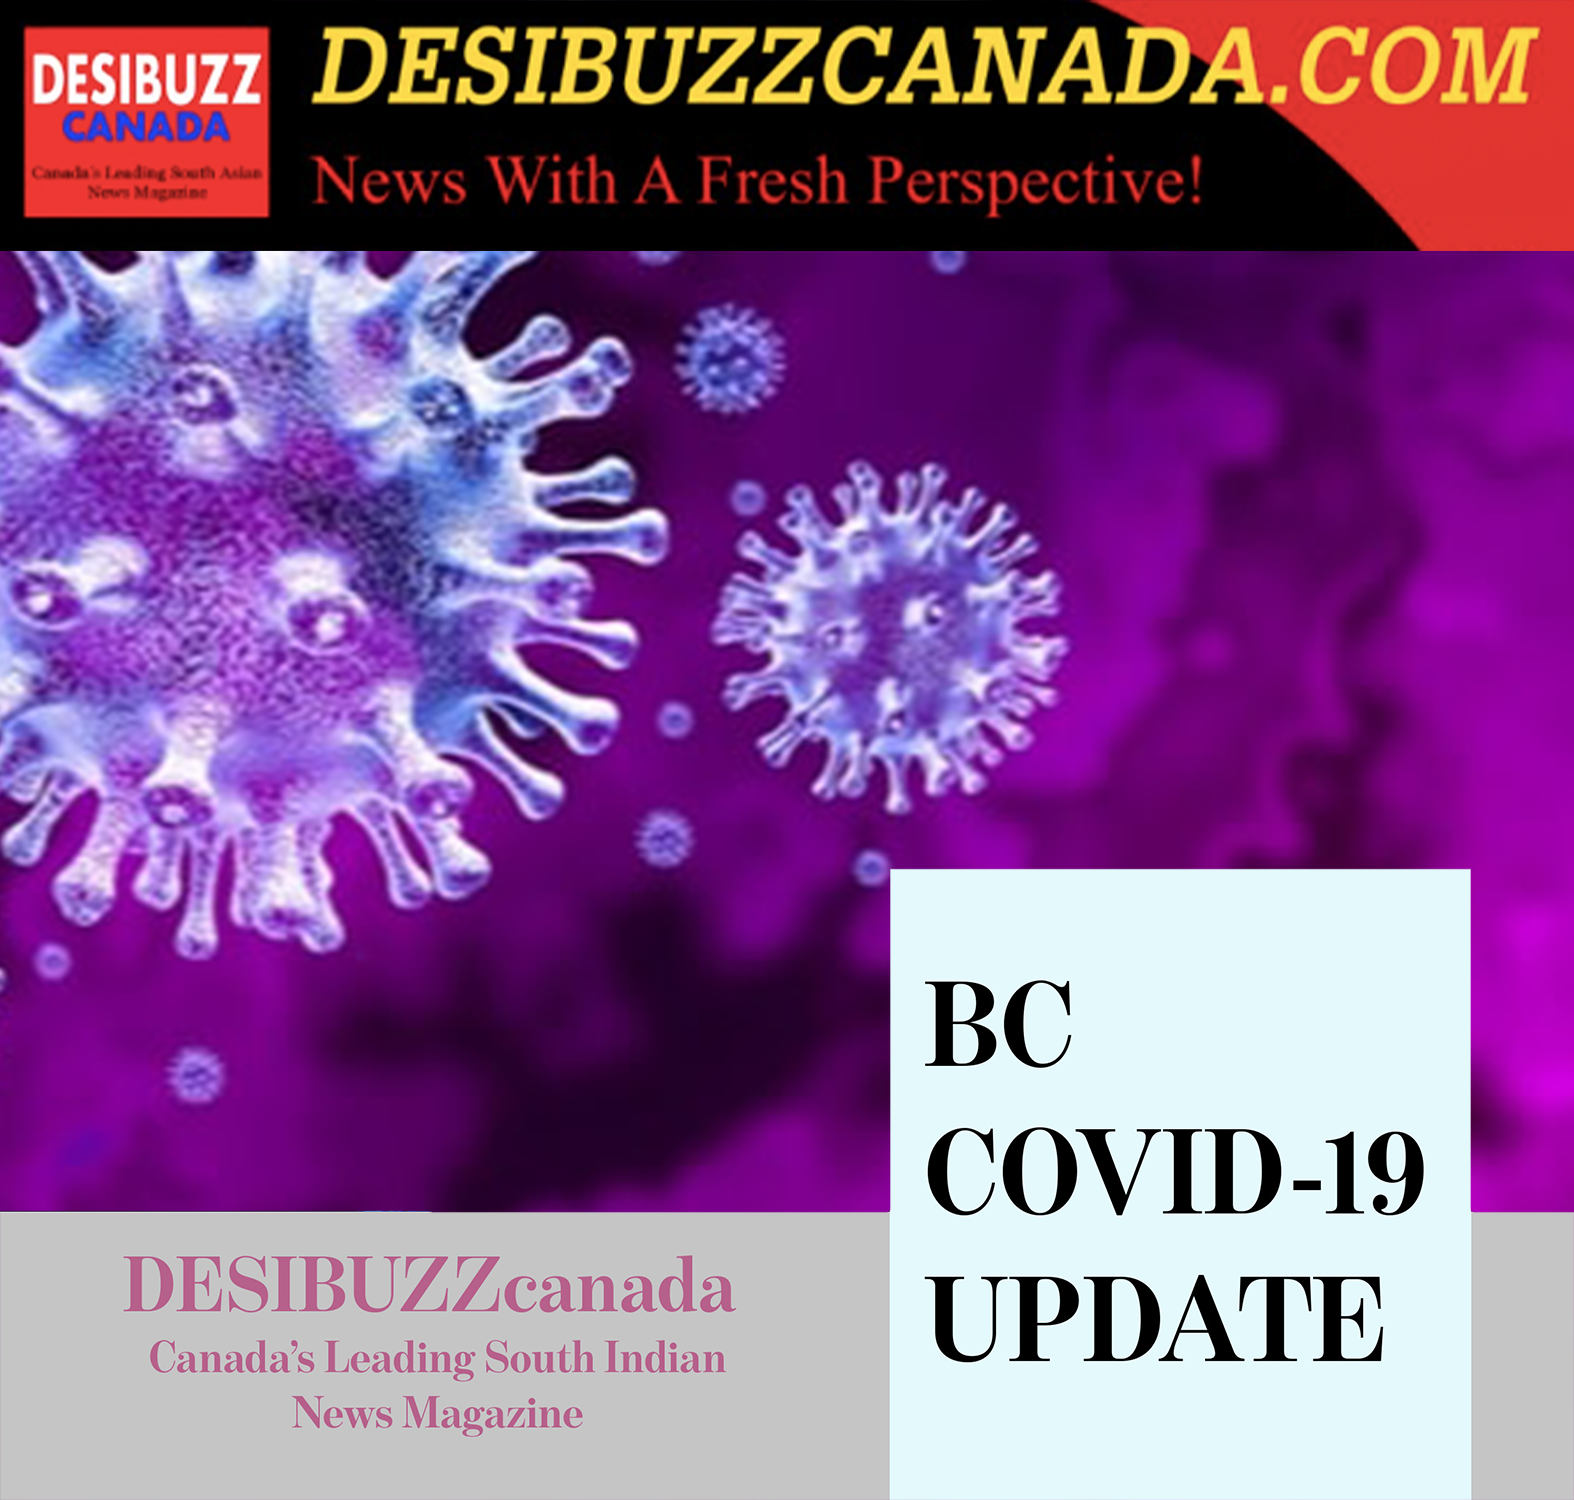 BC COVID-19 UPDATE: Two Deaths And Over 200 Cases Ends The Week